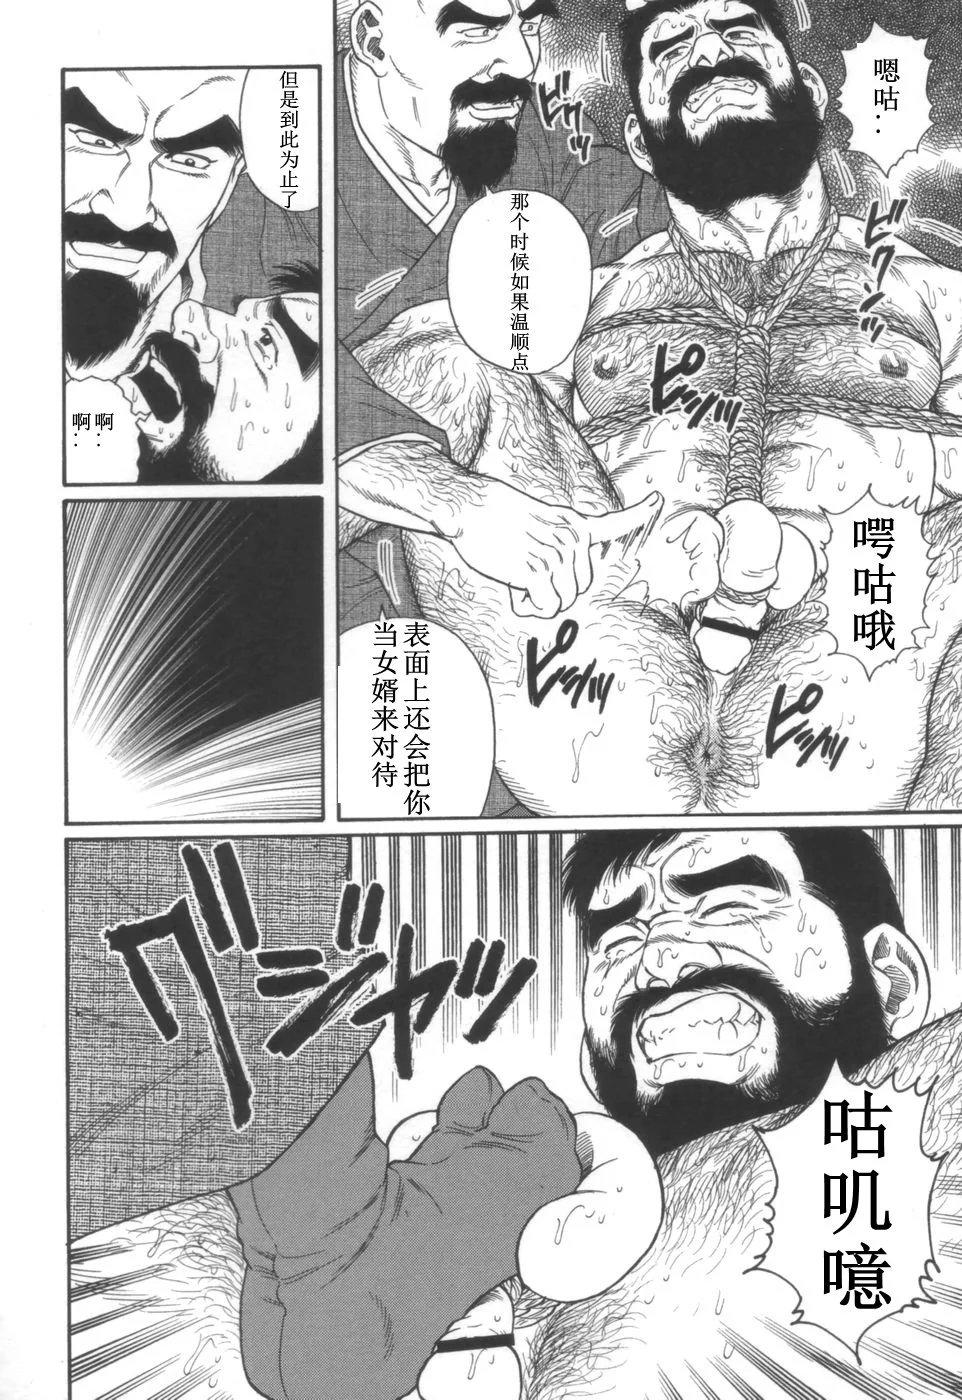 [Tagame Gengoroh] Gedou no Ie Joukan | 邪道之家 Vol. 1 Ch.5 [Chinese] 29